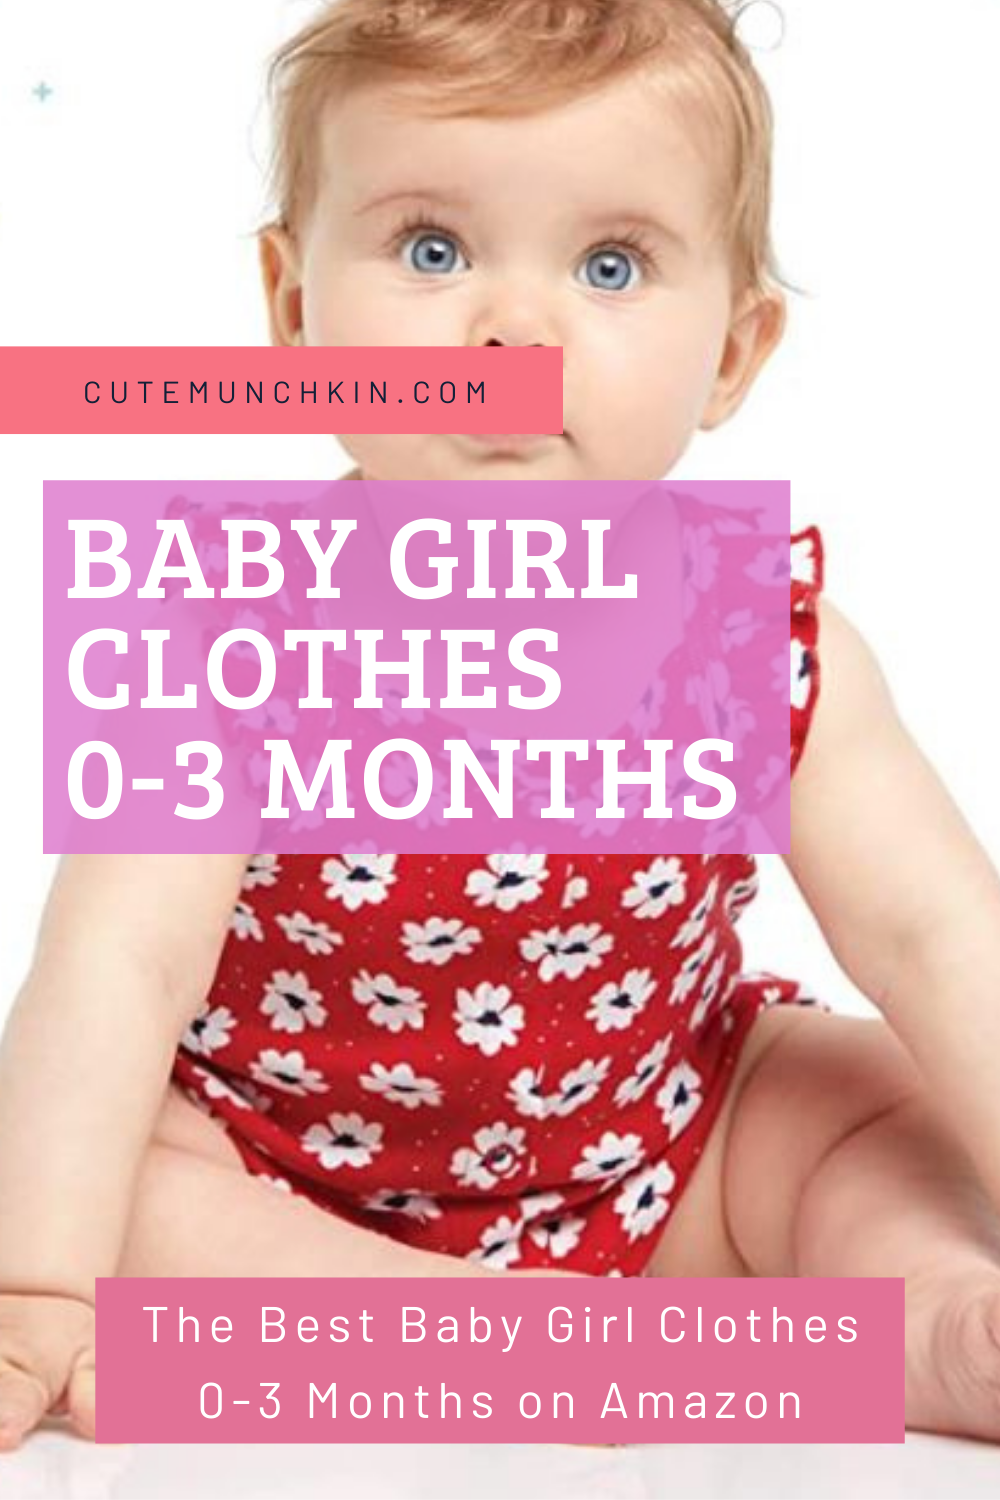 the best baby girl clothes 0-3 months on Amazon by Cute Munchkin